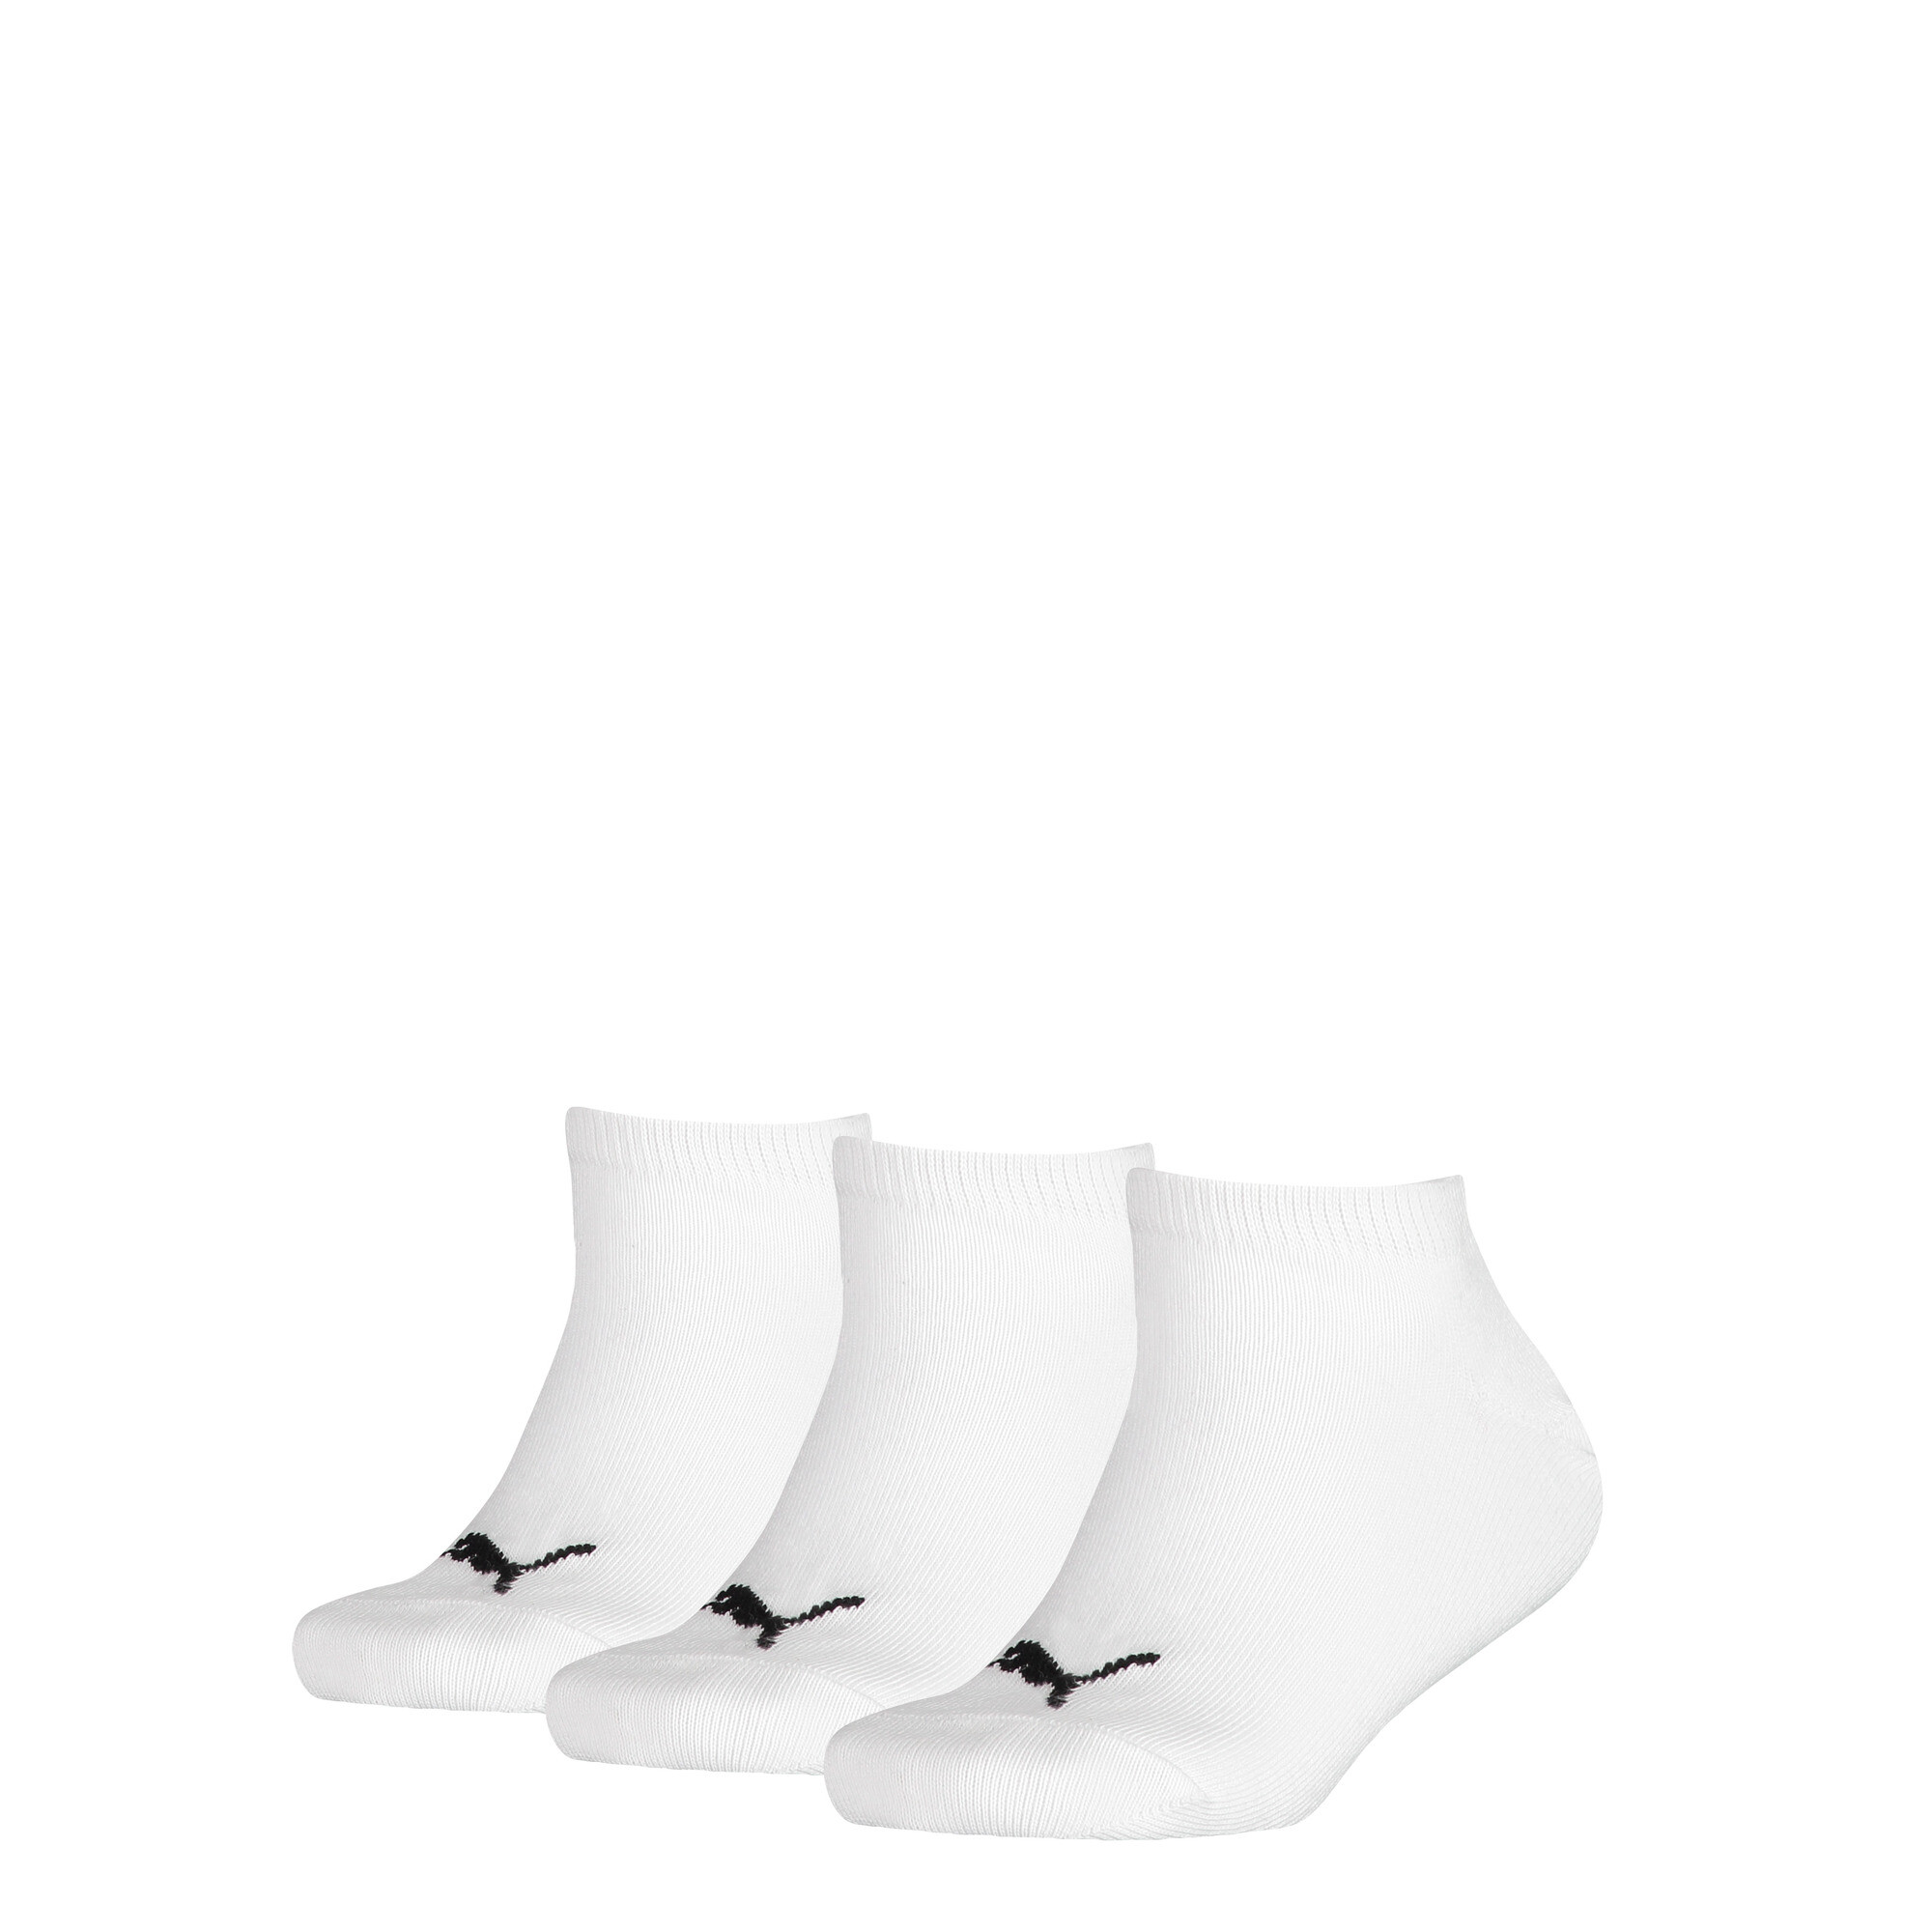 Kids' PUMA Invisible Socks 3 Pack In White, Size 39-42